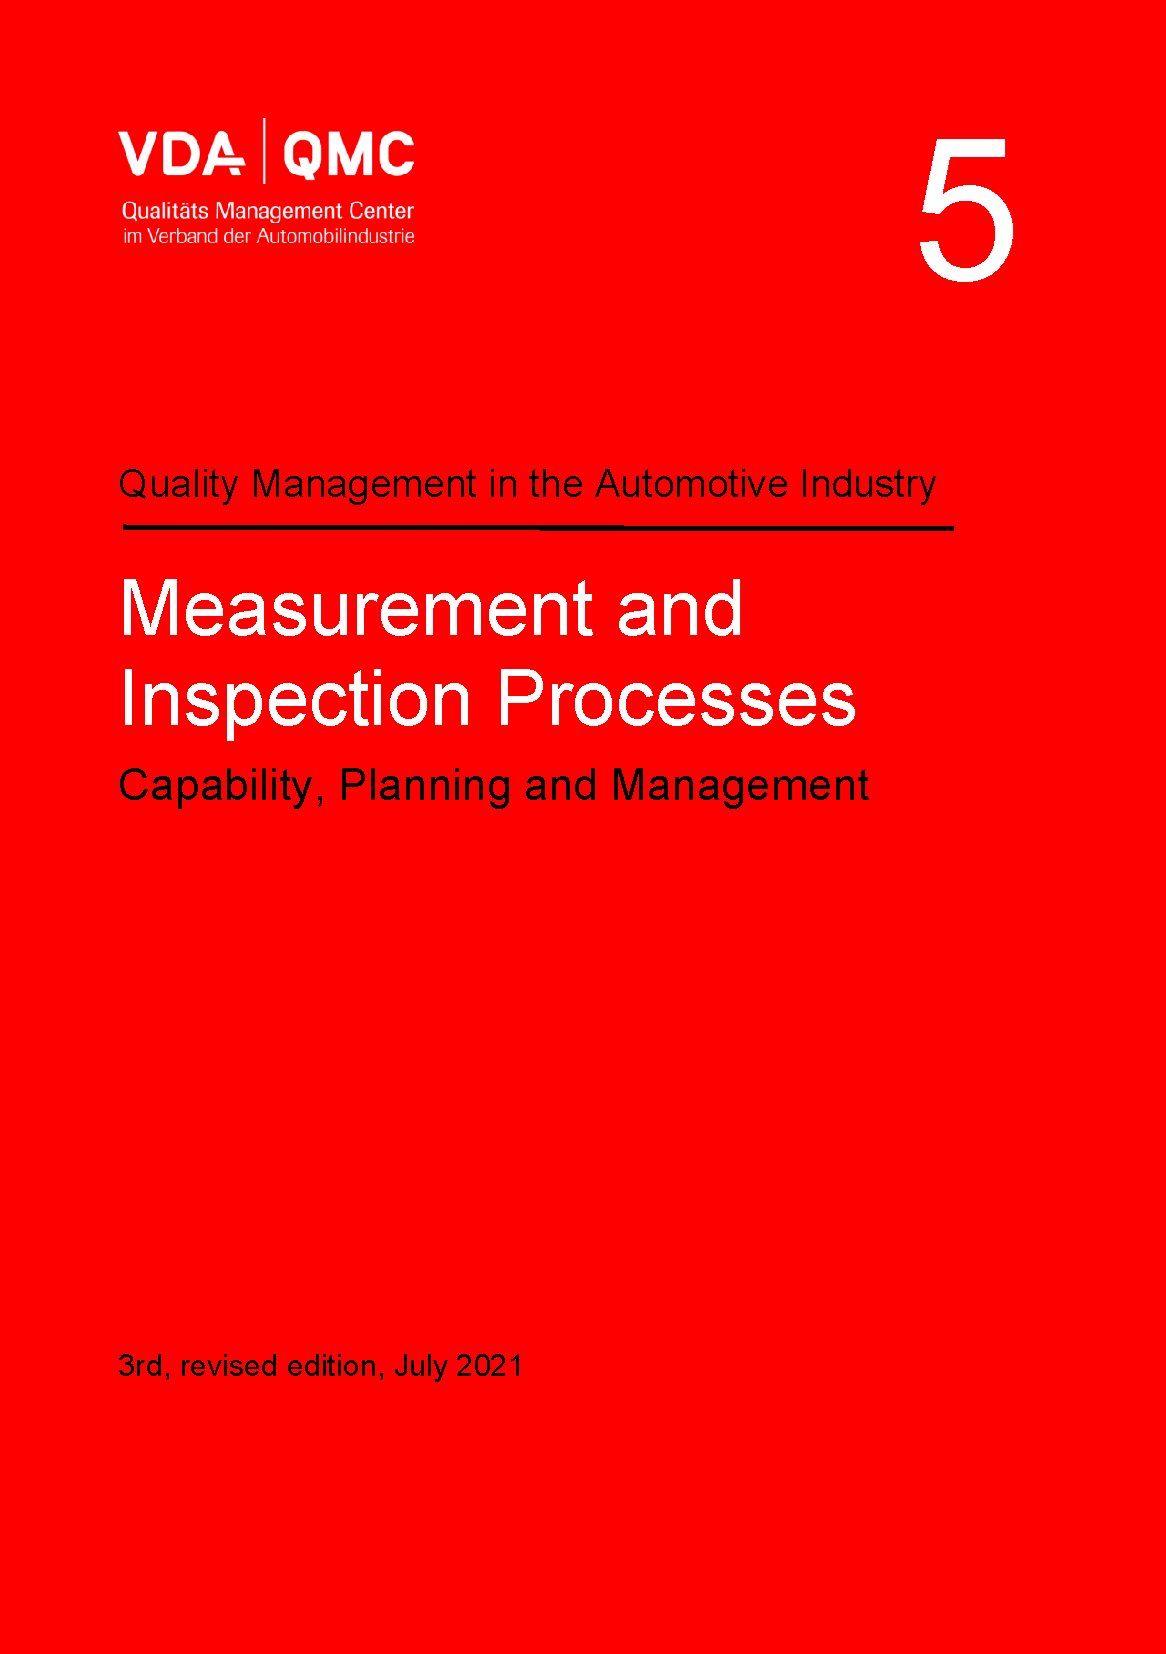 Publications  VDA Volume 5 Measurement and Inspection Processes.
 Capability, Planning and Management, 3rd revised edition, July 2021 1.7.2021 preview